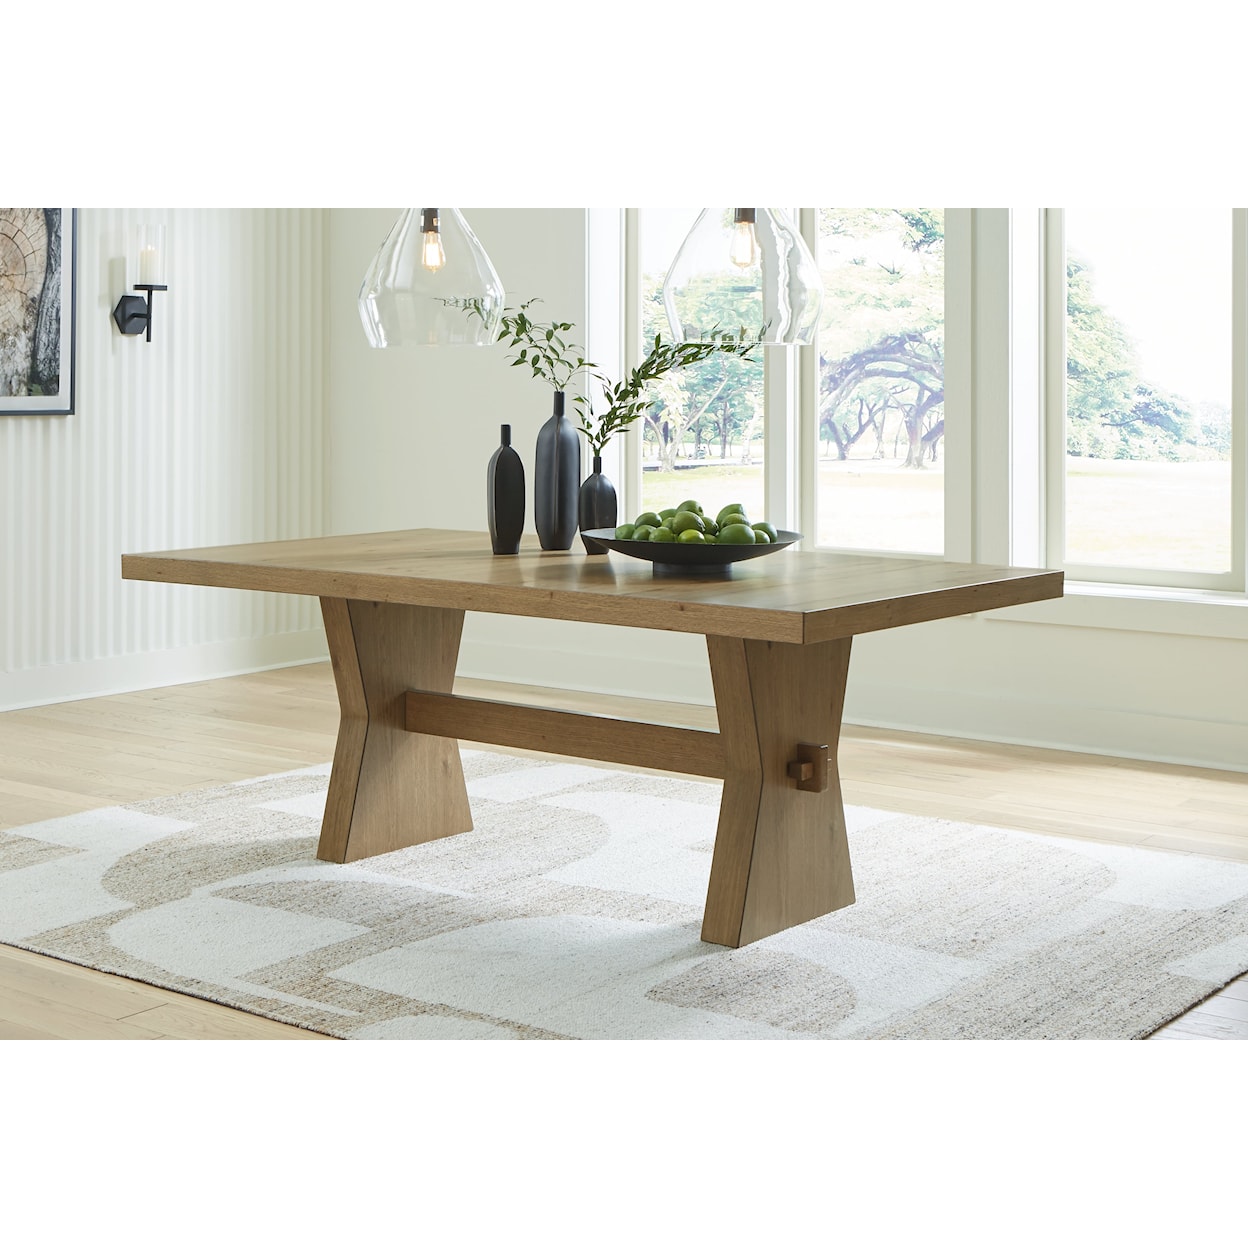 Signature Design by Ashley Furniture Galliden Rectangular Dining Room Table